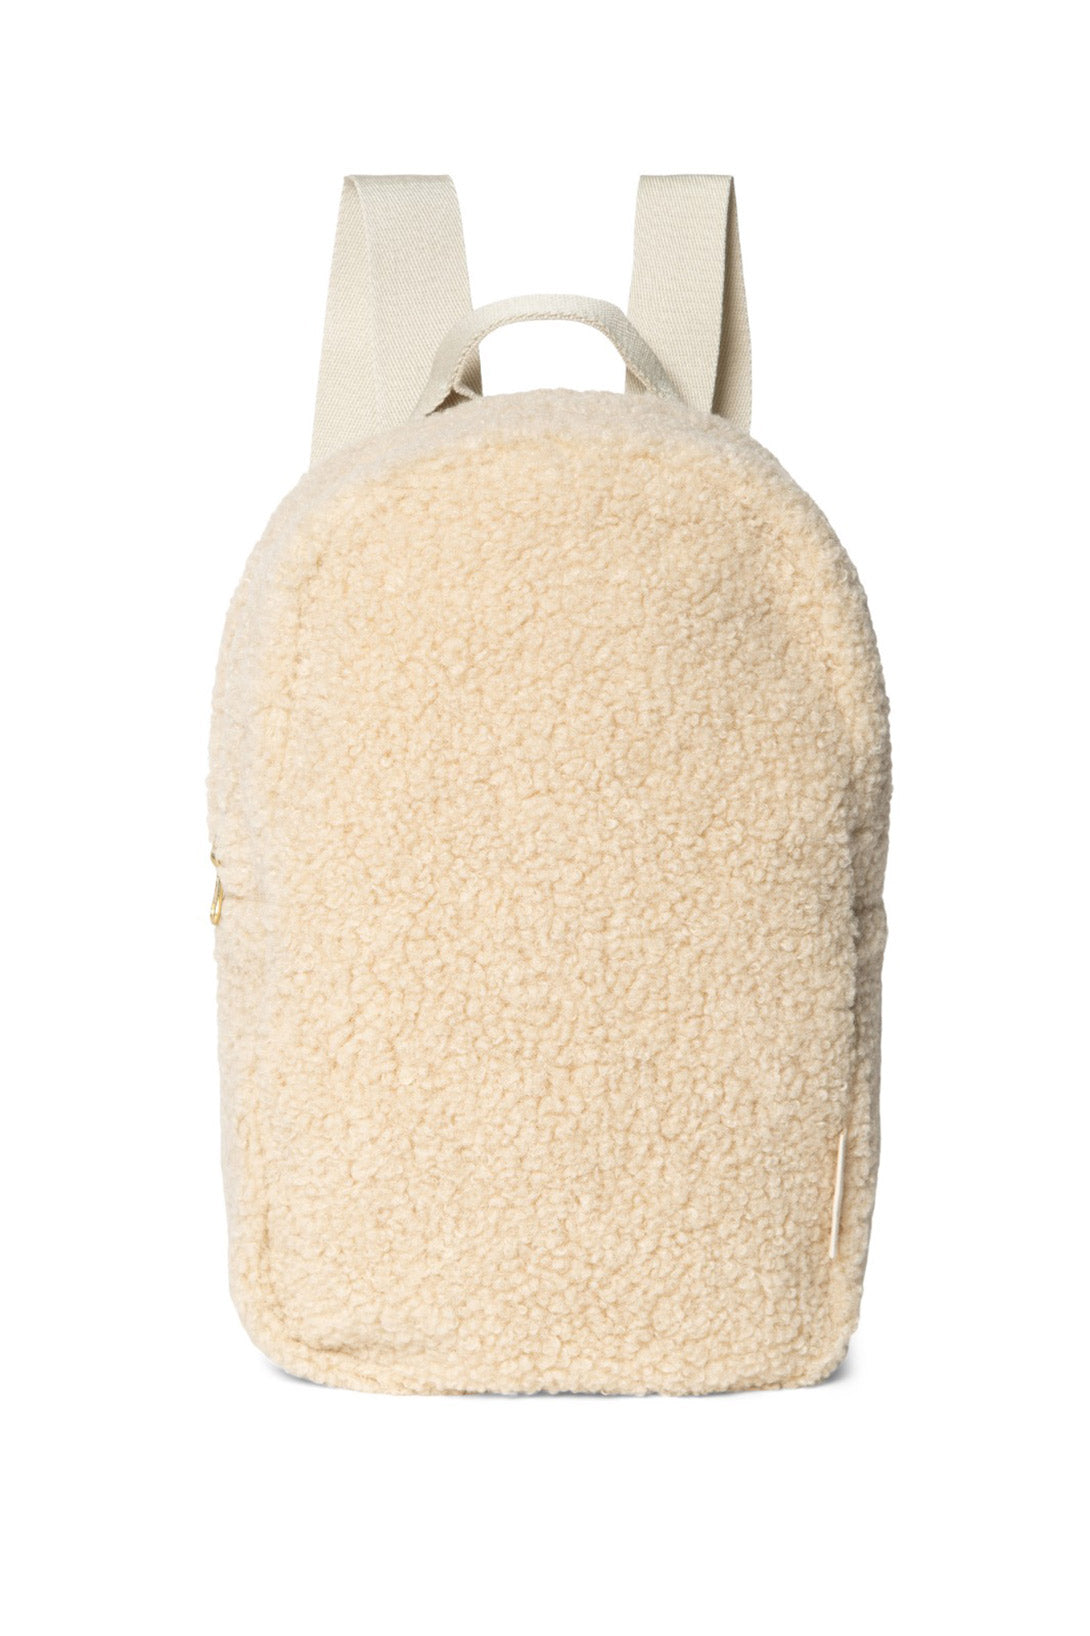 【Studio Noos】【30%OFF】Ecru Noos mini-Chunky backpack　リュックサック  | Coucoubebe/ククベベ